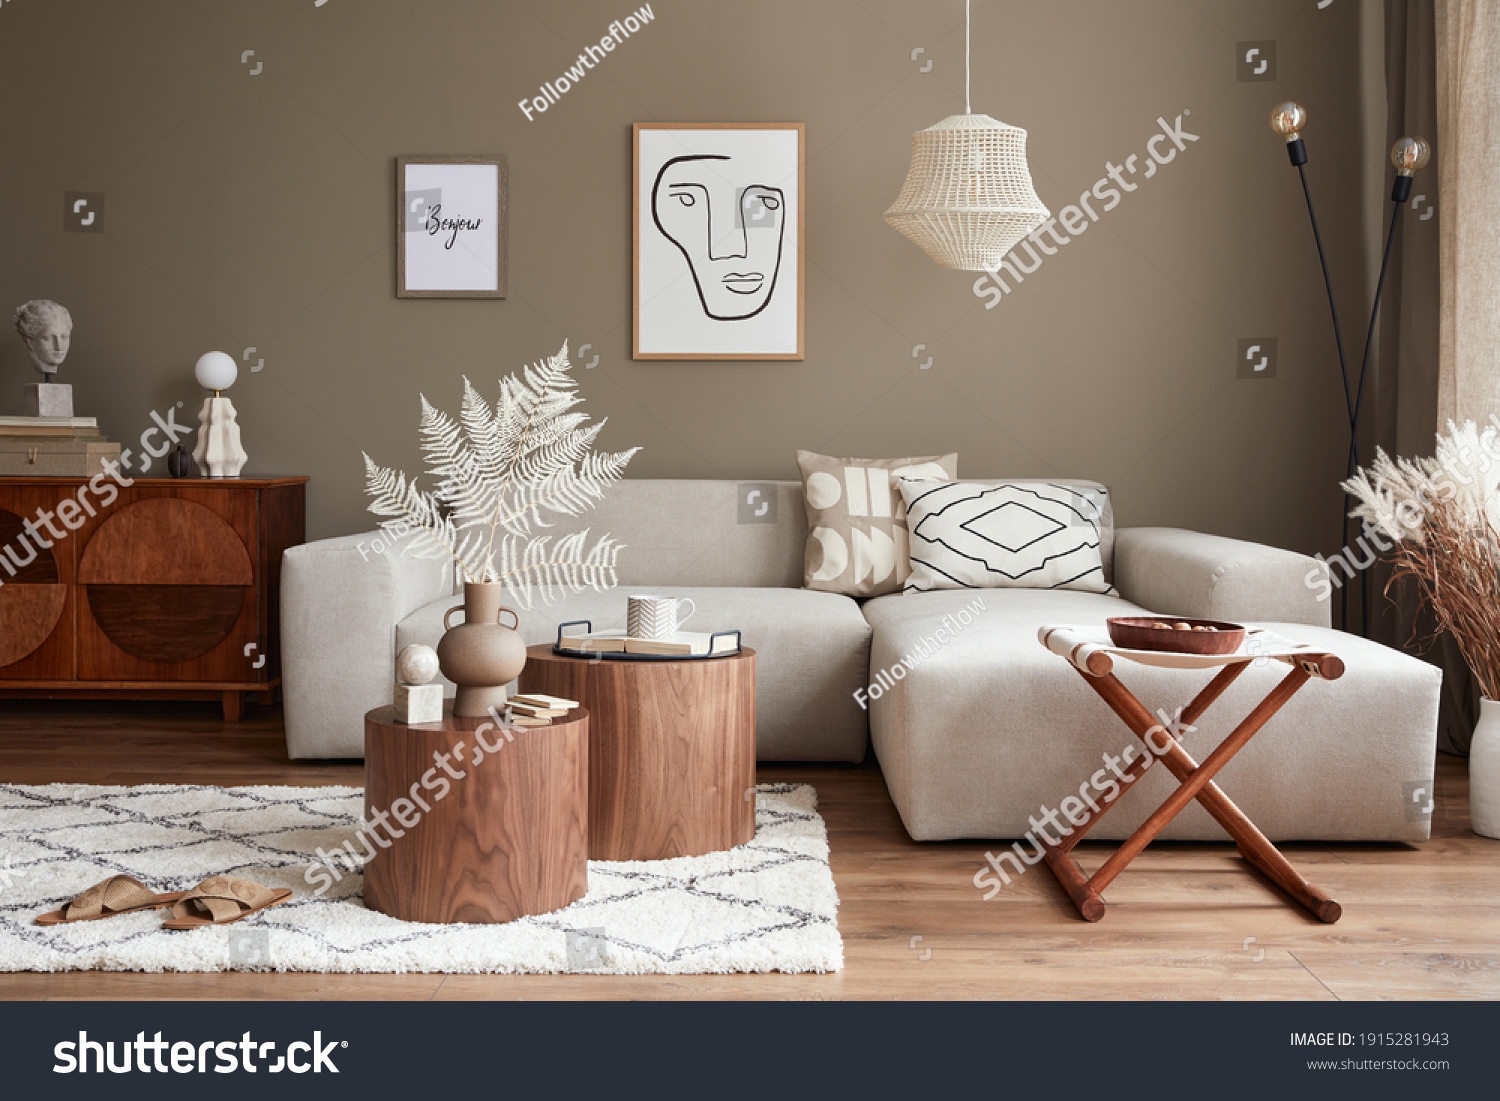 Interior design of stylish living room with modern neutral sofa, furniture, mock up poster farmes, dried flowers in vase, coffee tables, decoration and elegant personal accessories in home decor.  #1915281943